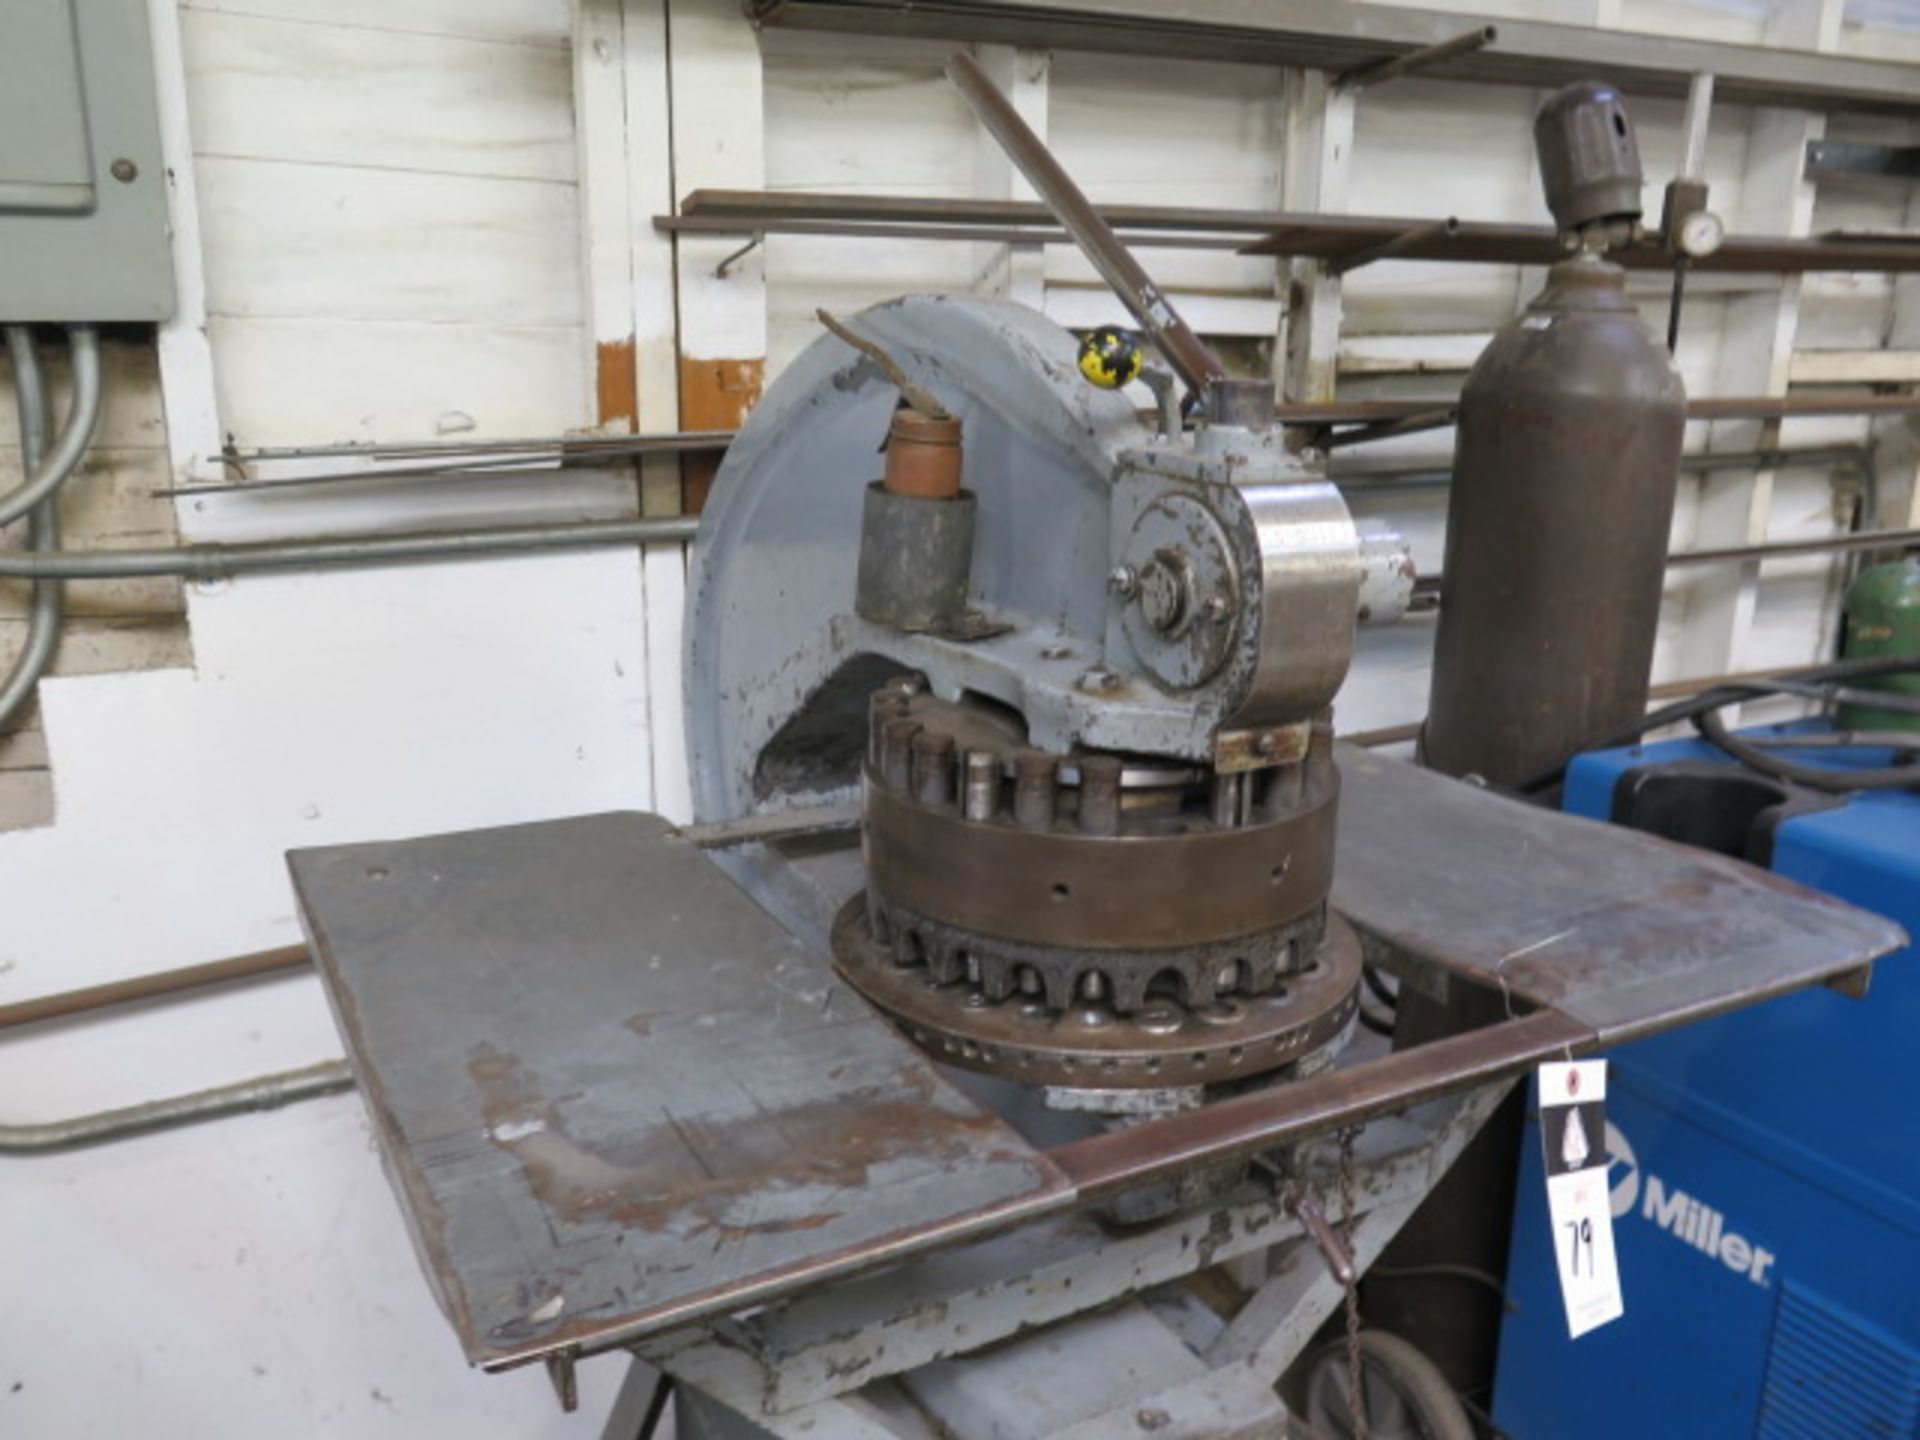 Rotex mdl 18A56 18-Station Turret Punch Press s/n 11980 w/ Rolling Stand (SOLD AS-IS - NO WARRANTY) - Image 3 of 8